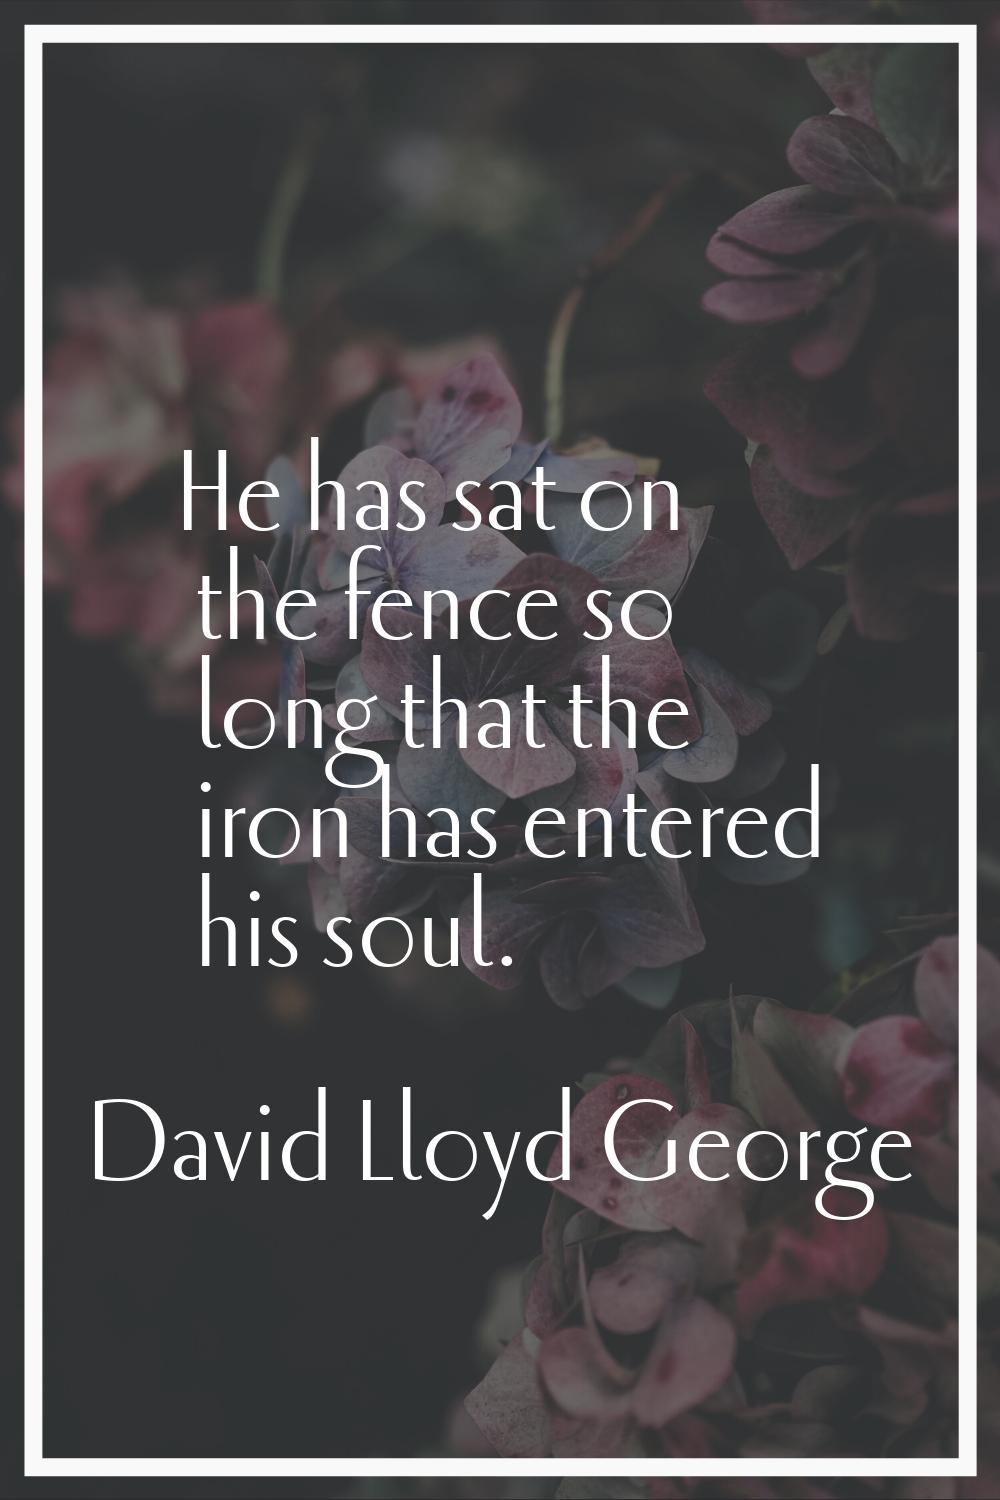 He has sat on the fence so long that the iron has entered his soul.